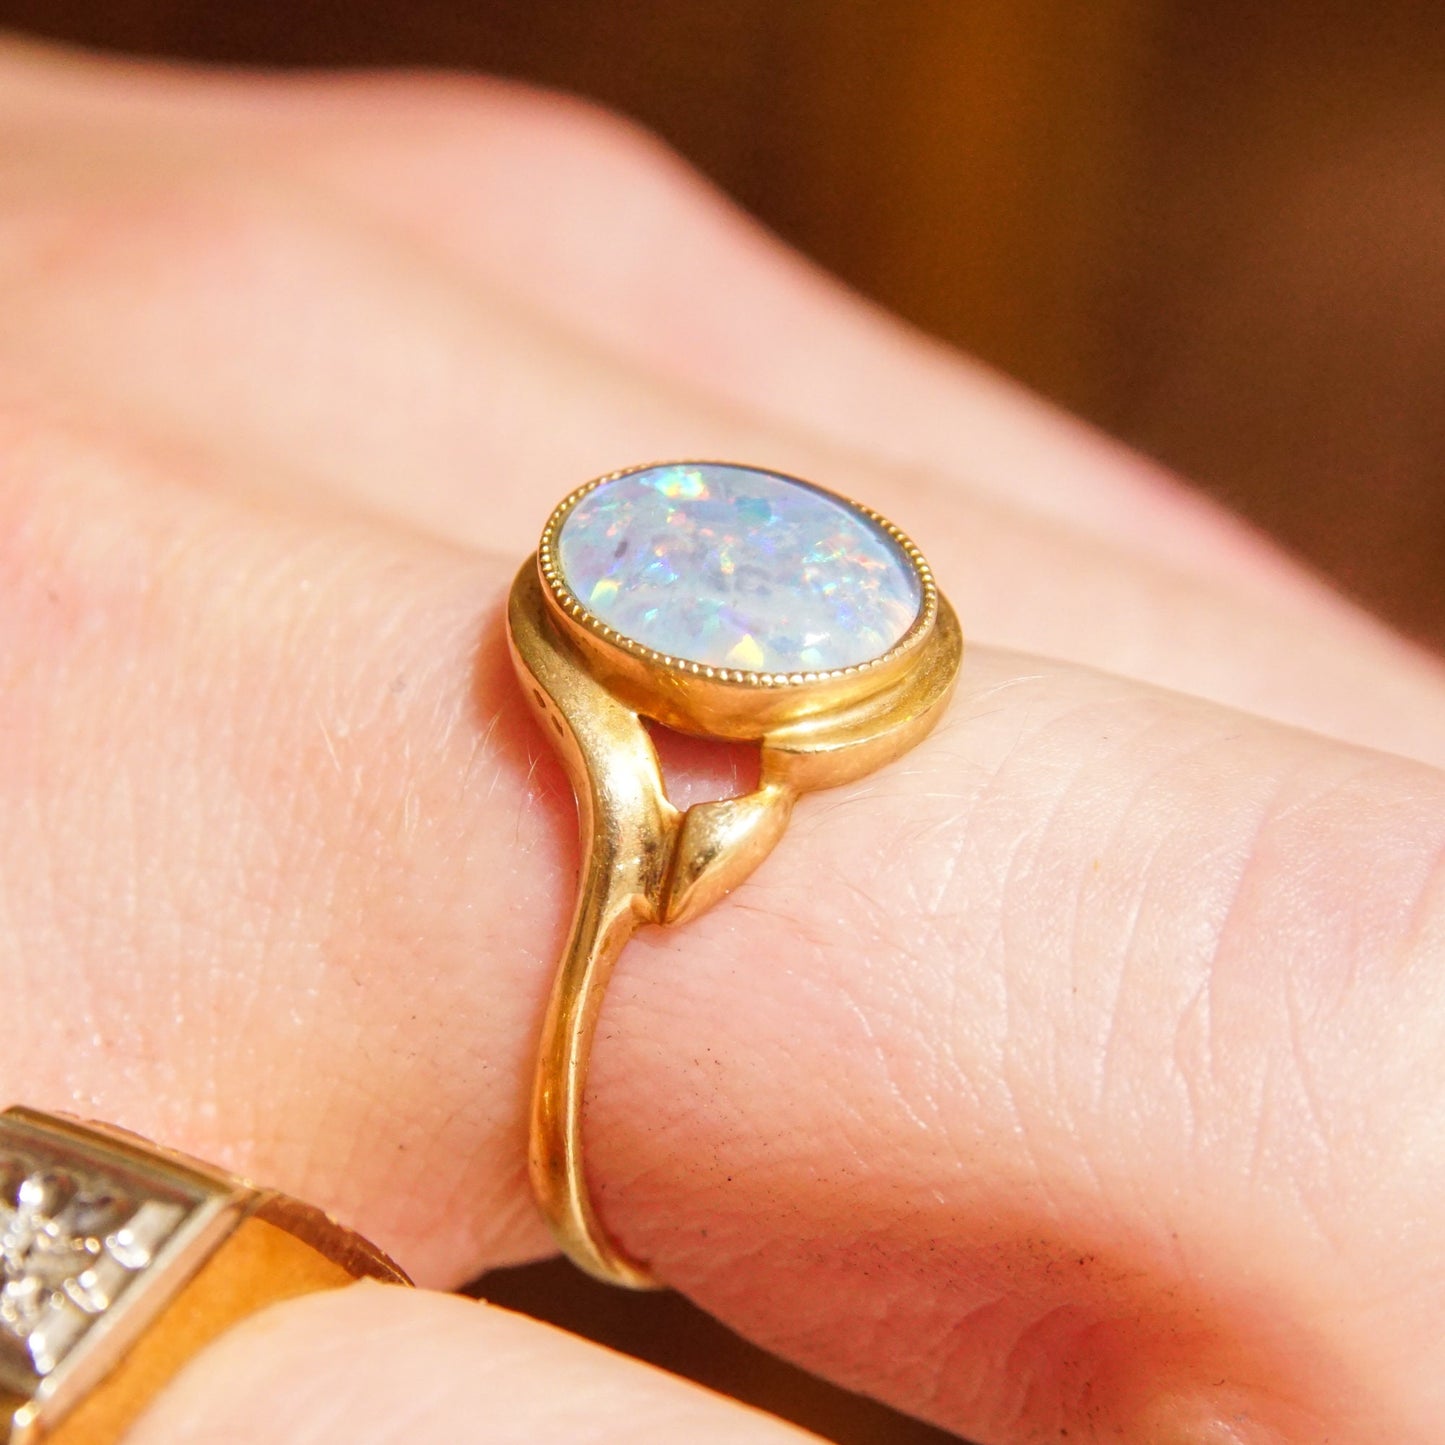 10K yellow gold cocktail ring featuring a round opal triplet gemstone, worn on a finger to showcase the iridescent play-of-color. Estate jewelry piece and October birthstone ring in a size 8 1/4 US.